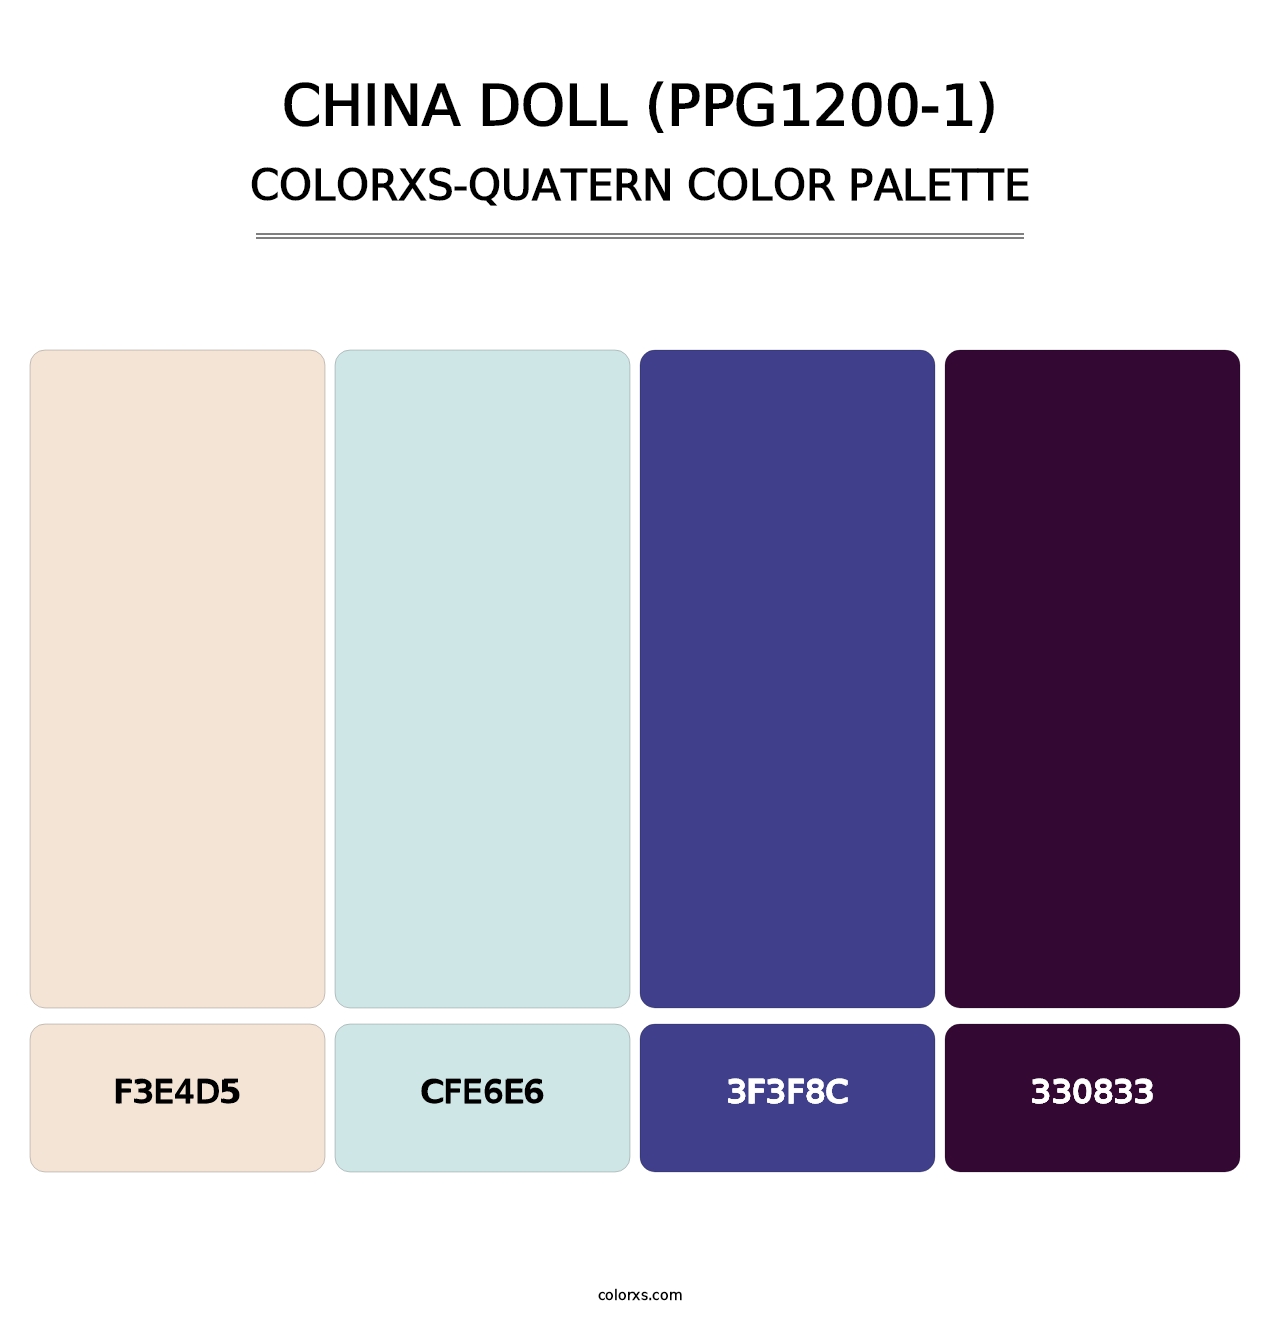 China Doll (PPG1200-1) - Colorxs Quatern Palette